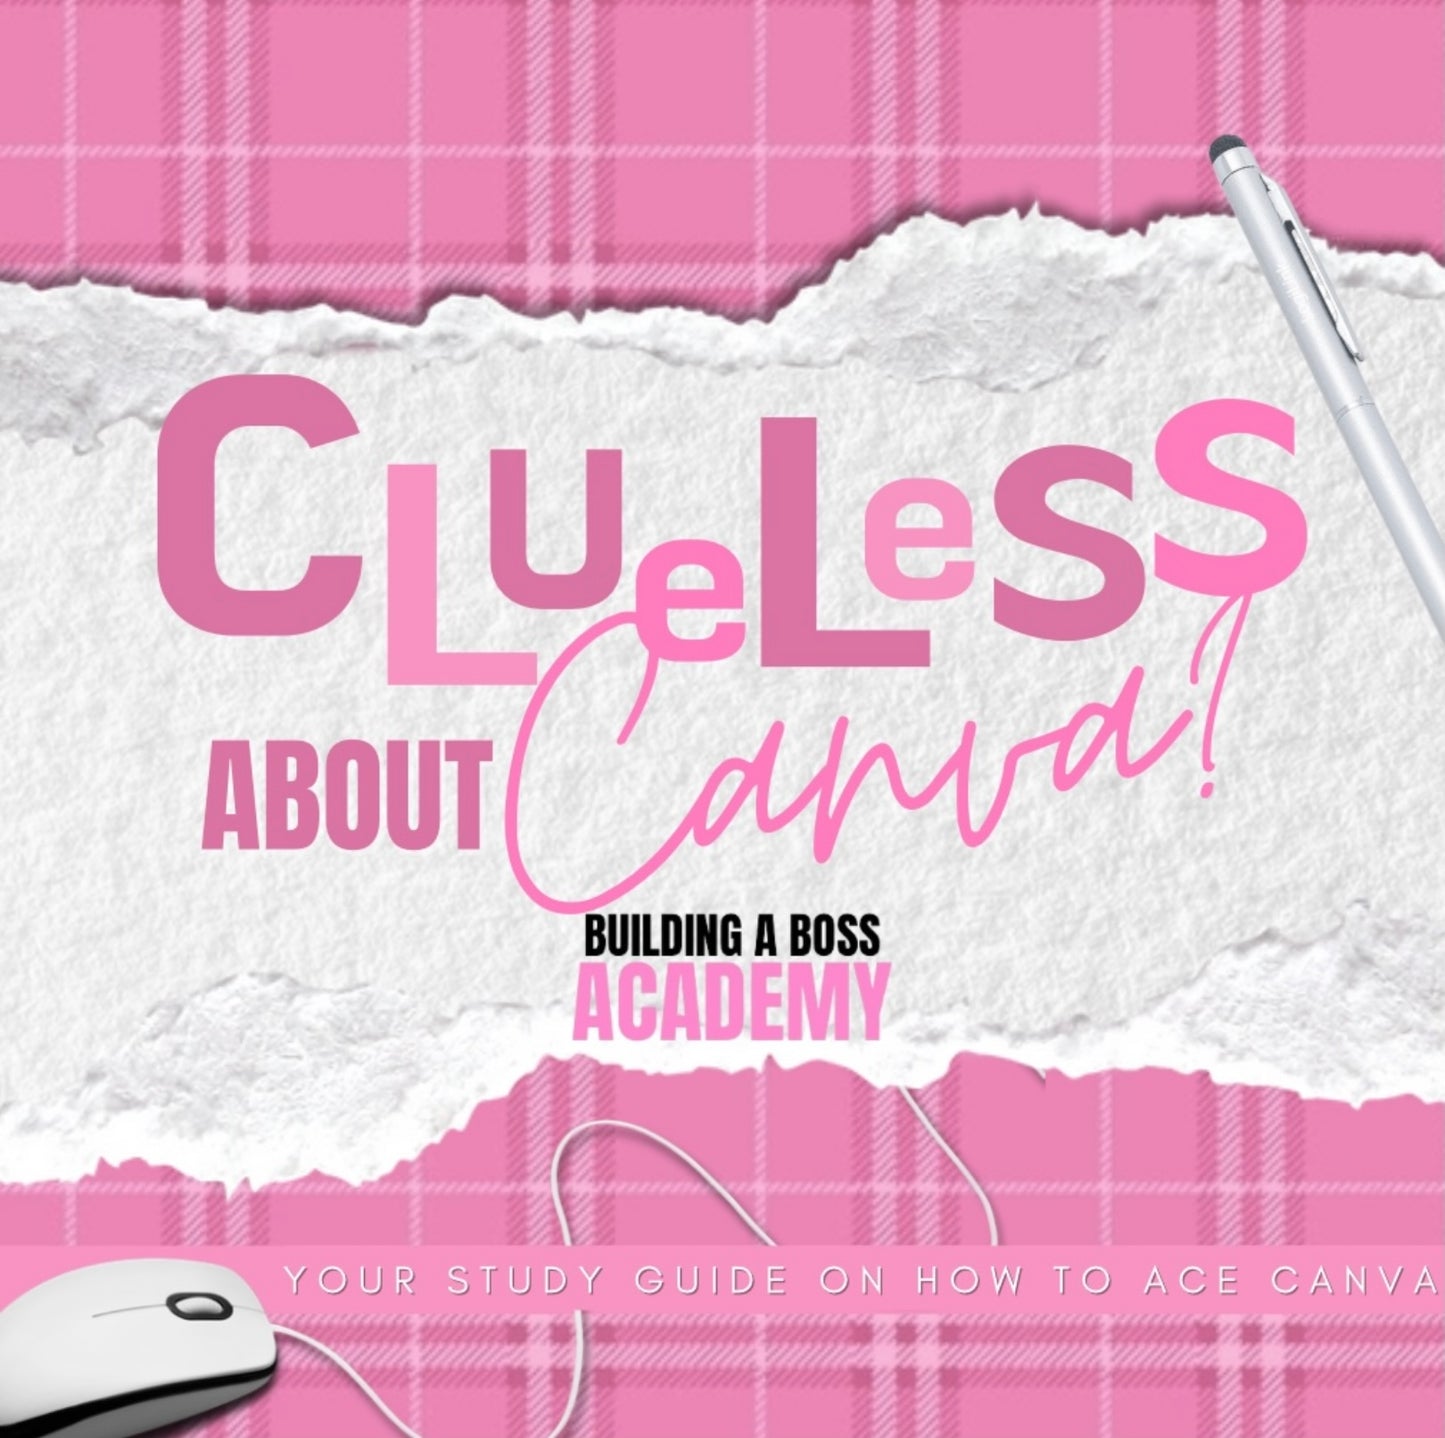 Clueless About Canva Course